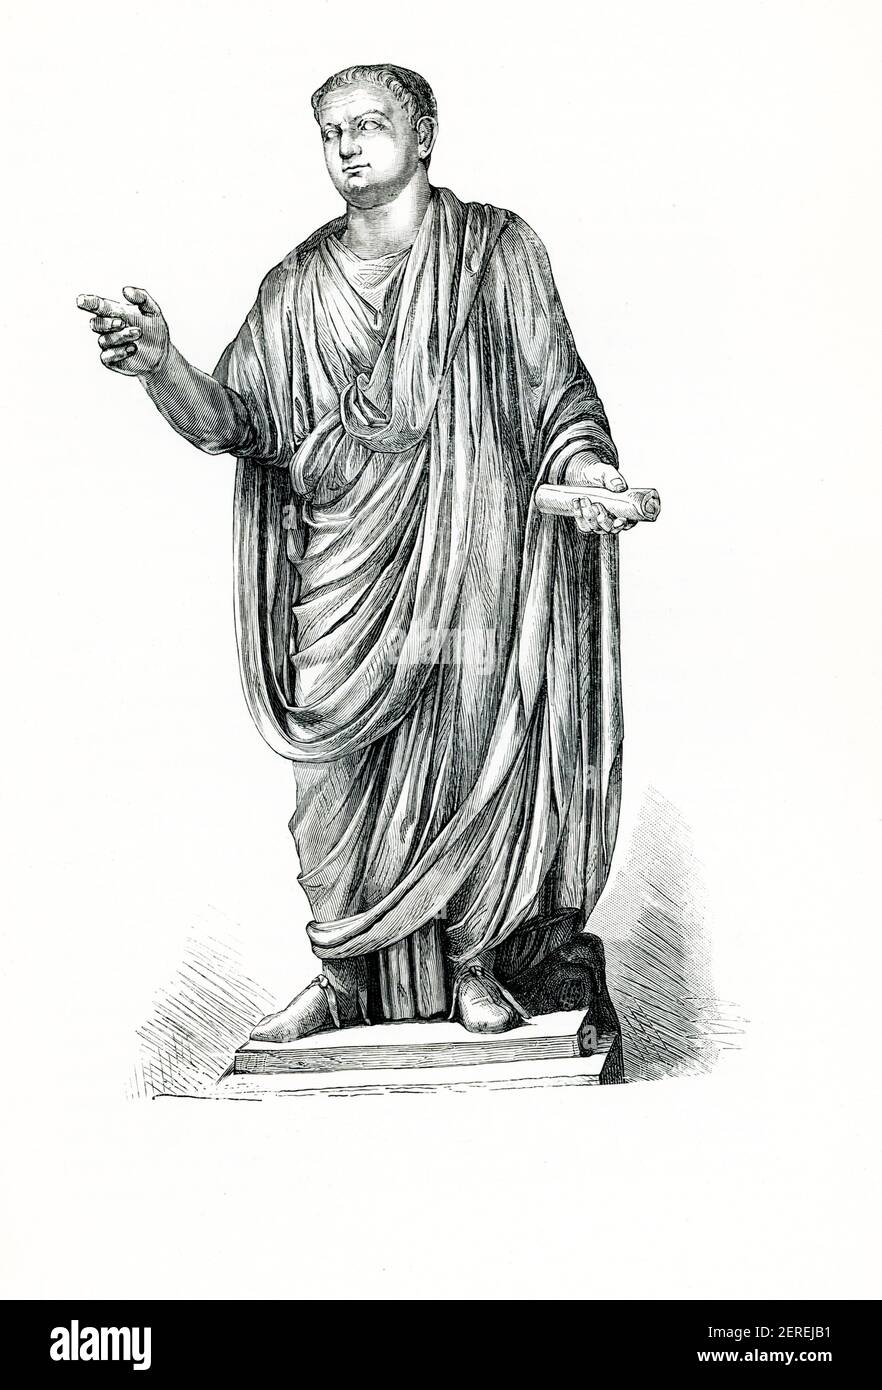 This 1880s illustration shows   the statue of Titus in the Vatican Braccio Novo No. 26. It was found near the Church of St John Lateran in 1828. Titus was Roman emperor from 79 to 81. A member of the Flavian dynasty, Titus succeeded his father Vespasian upon his death. Before becoming emperor, Titus gained renown as a military commander, serving under his father in Judea during the First Jewish–Roman War. Stock Photo